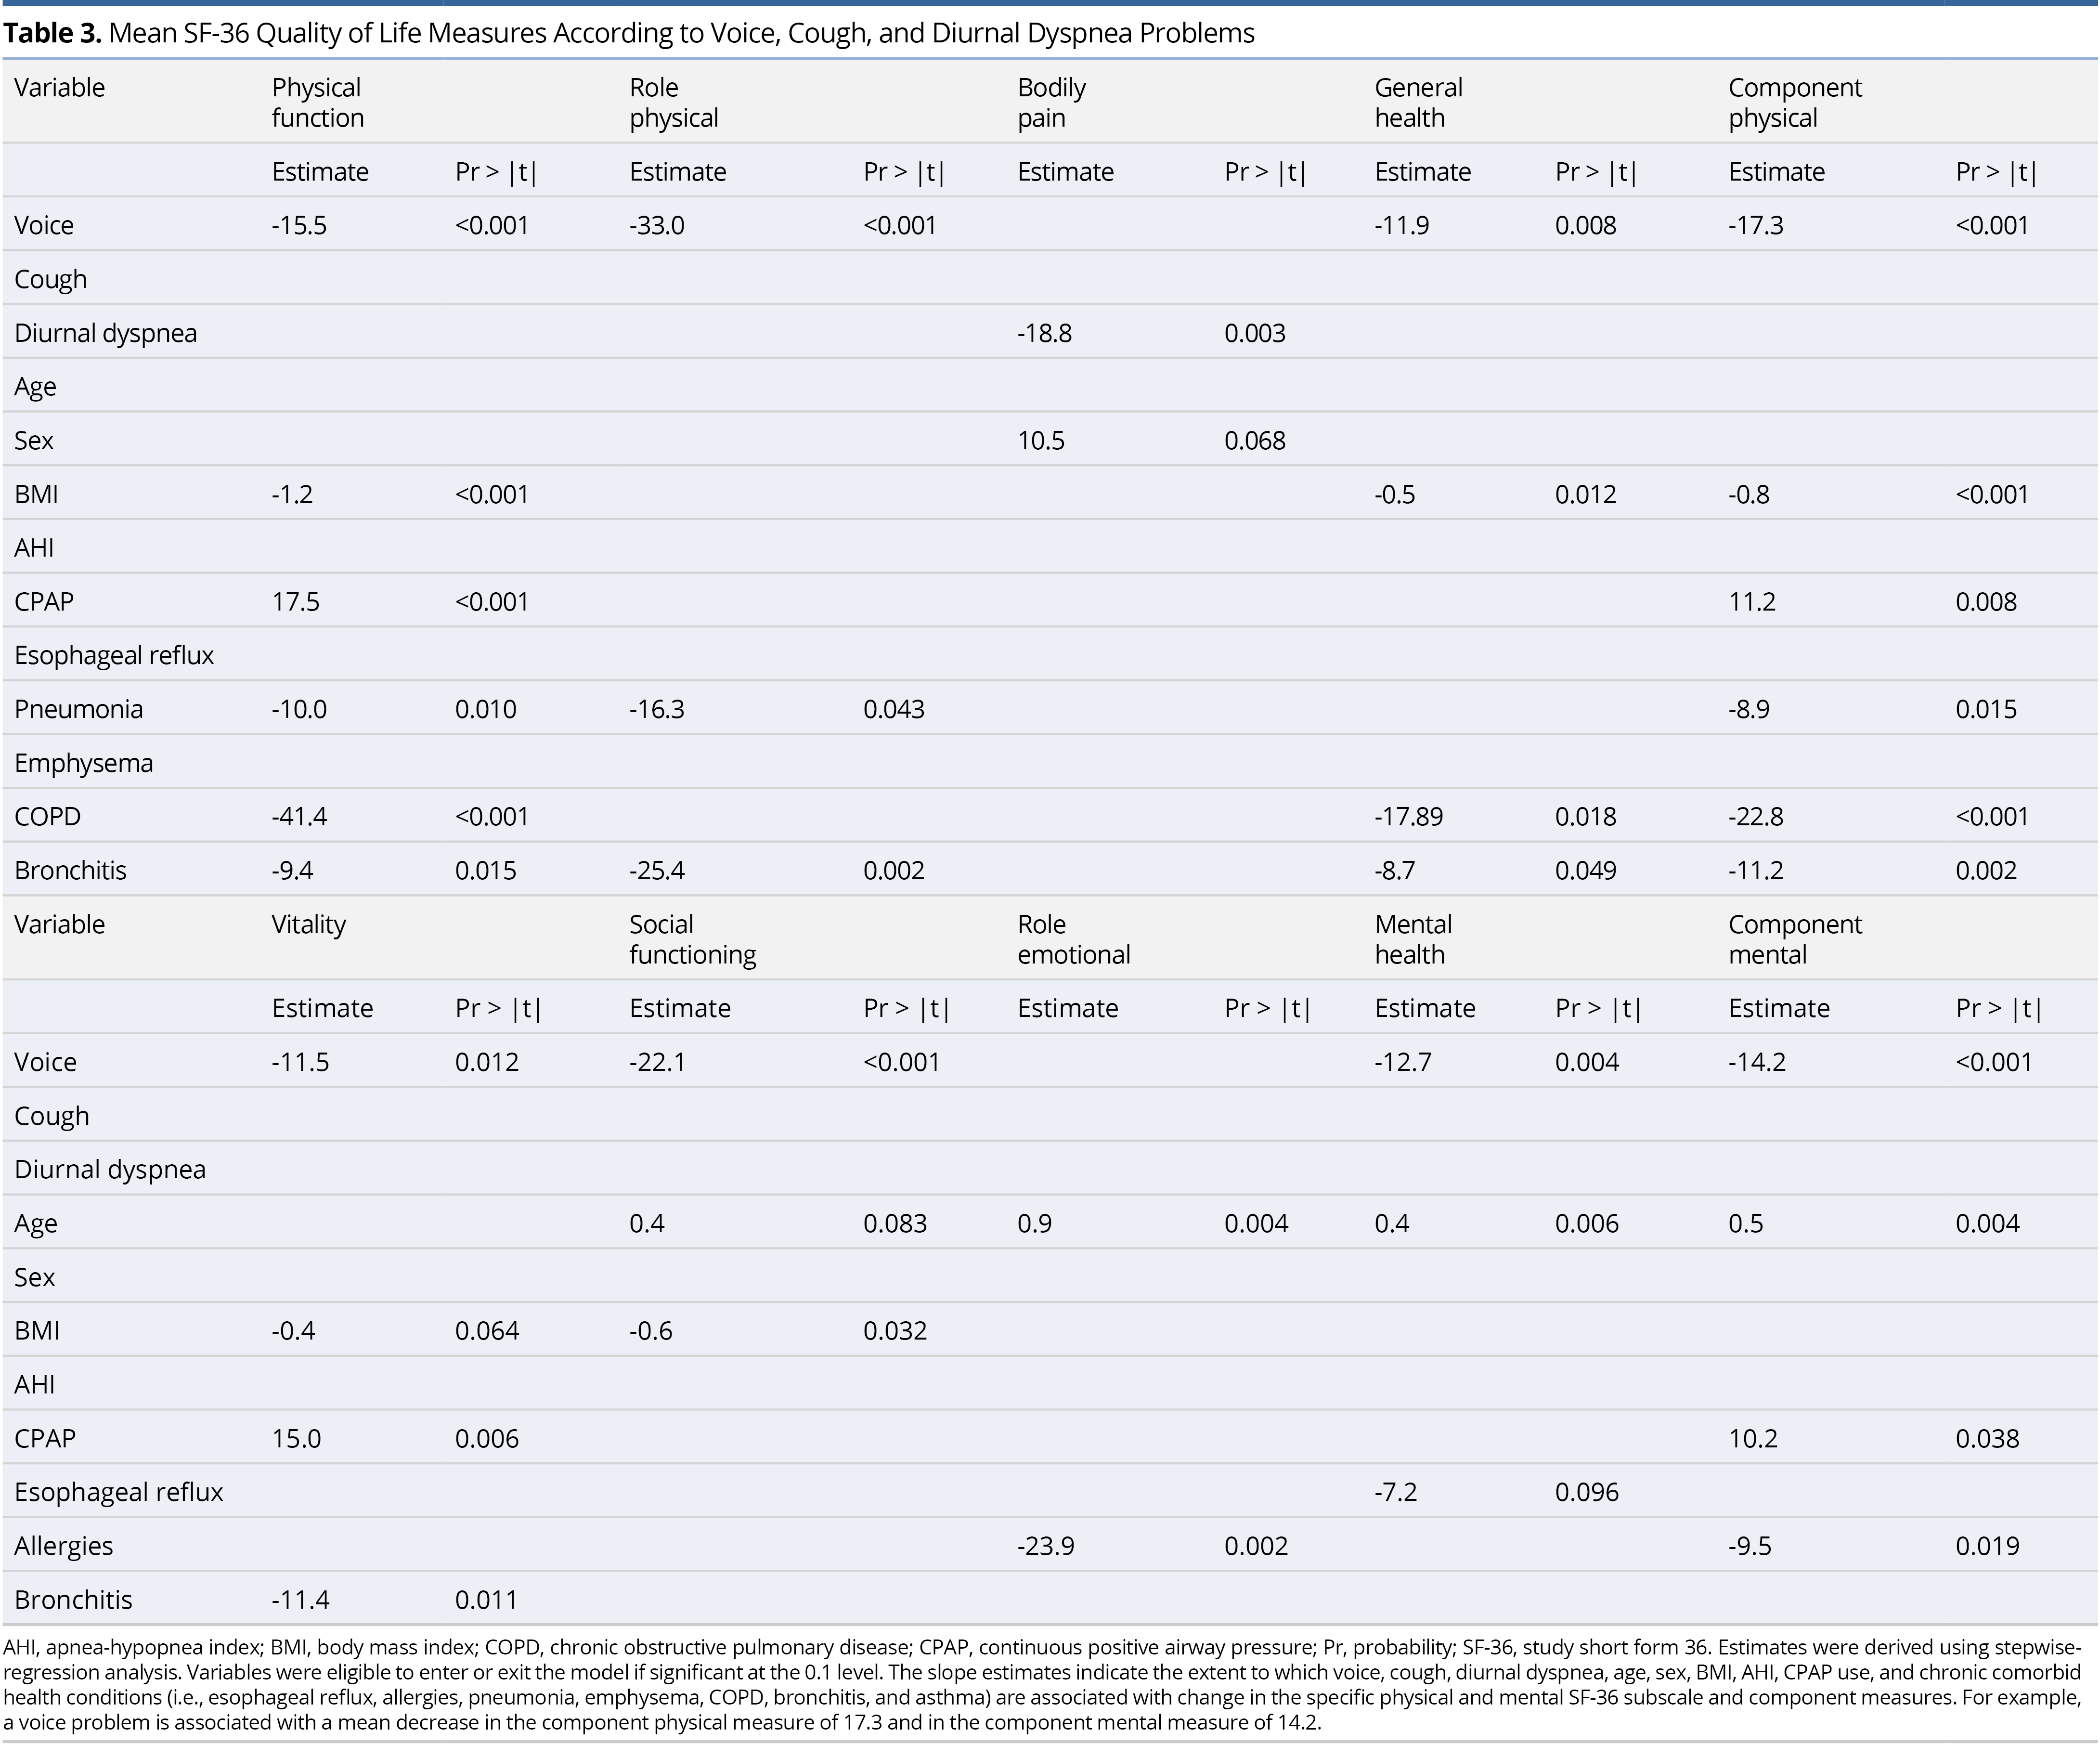 Table 3.pngMean SF-36 Quality of Life Measures According to Voice, Cough, and Diurnal Dyspnea Problems